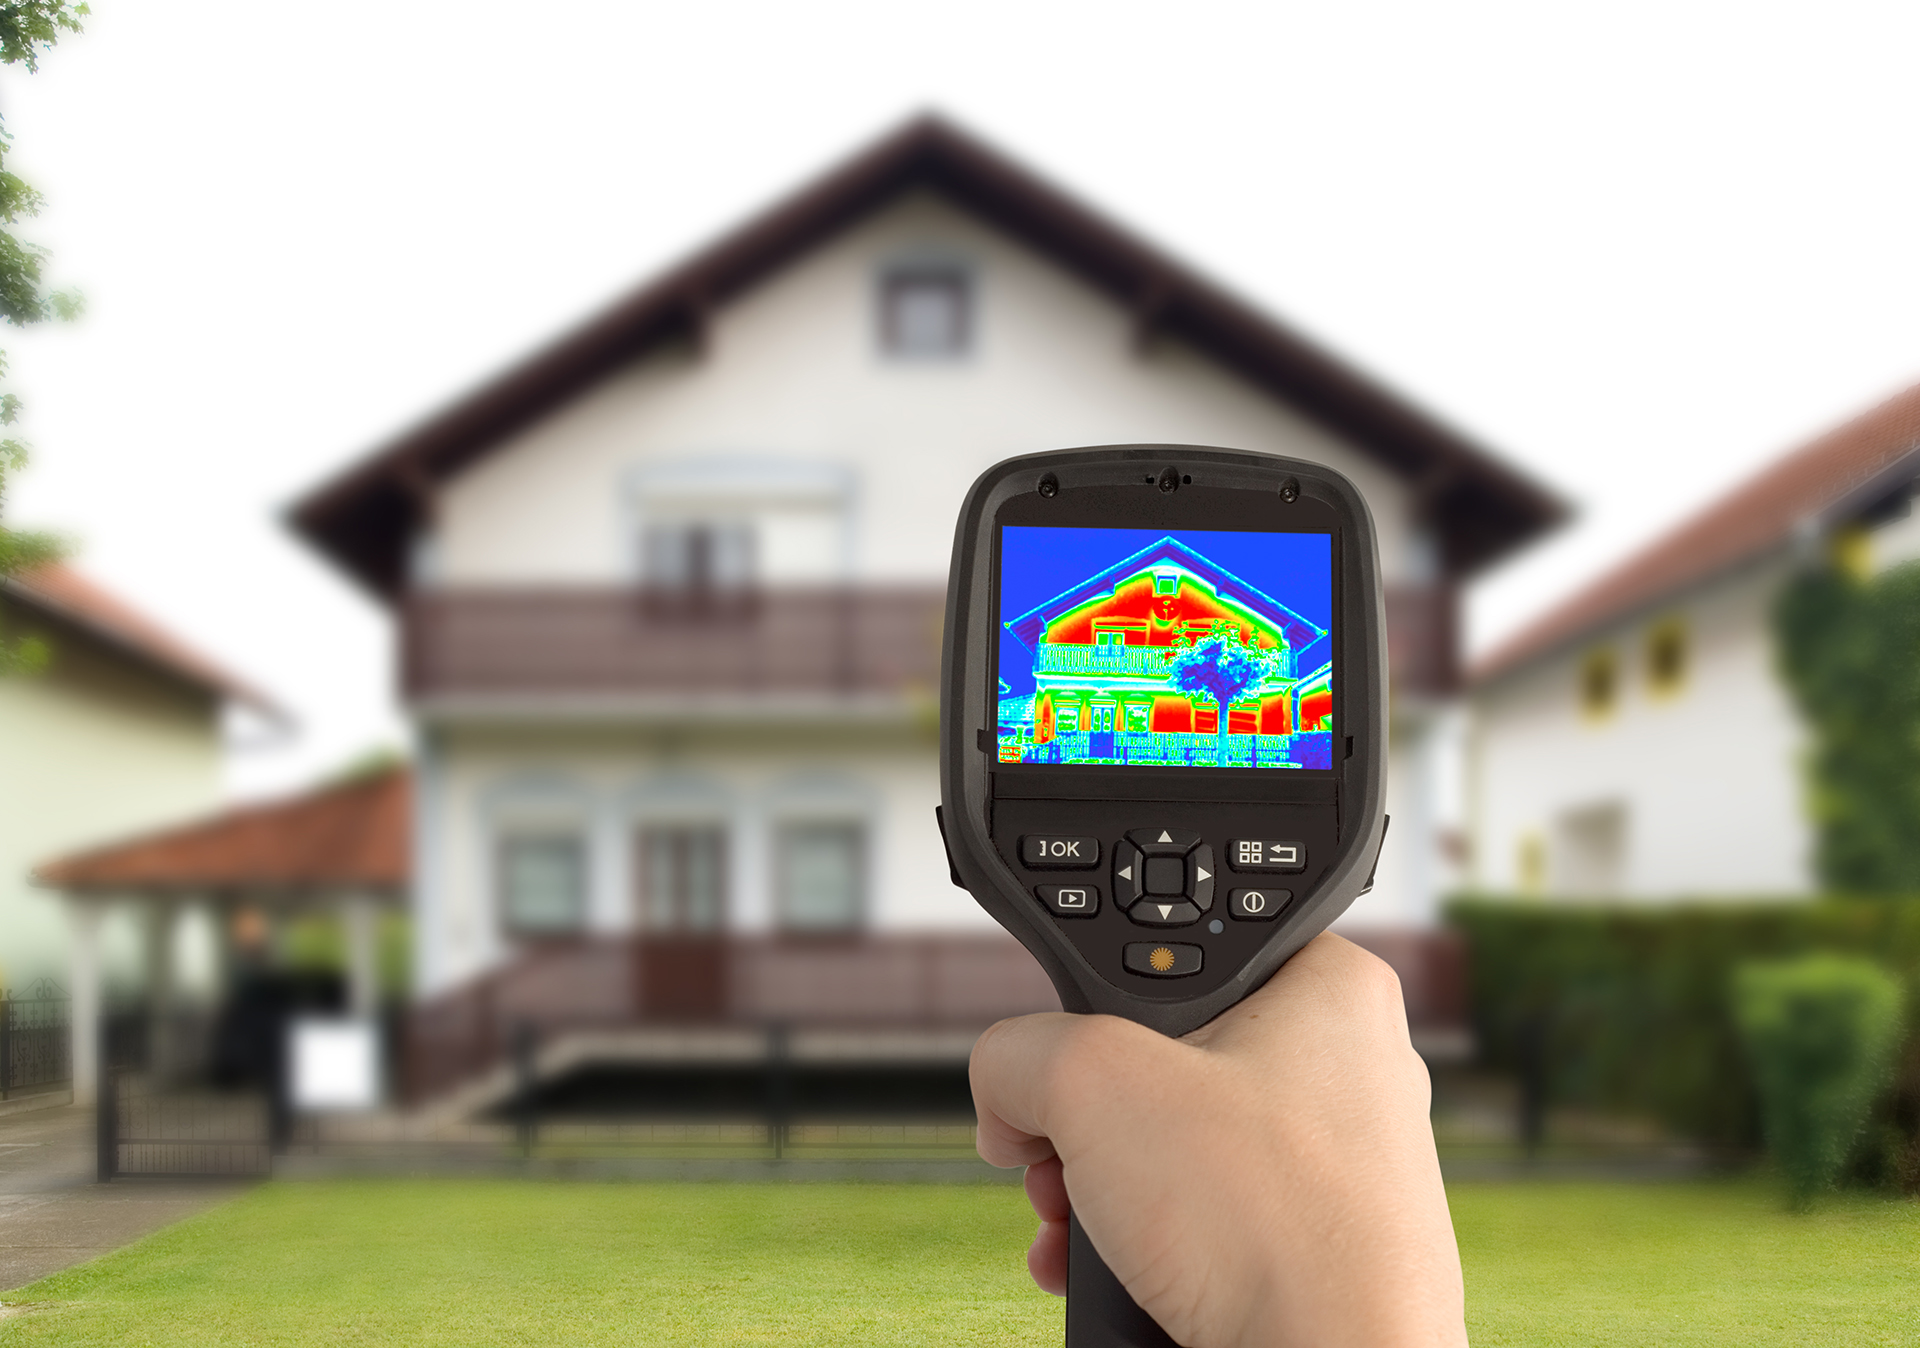 thermal camera pointed at a house